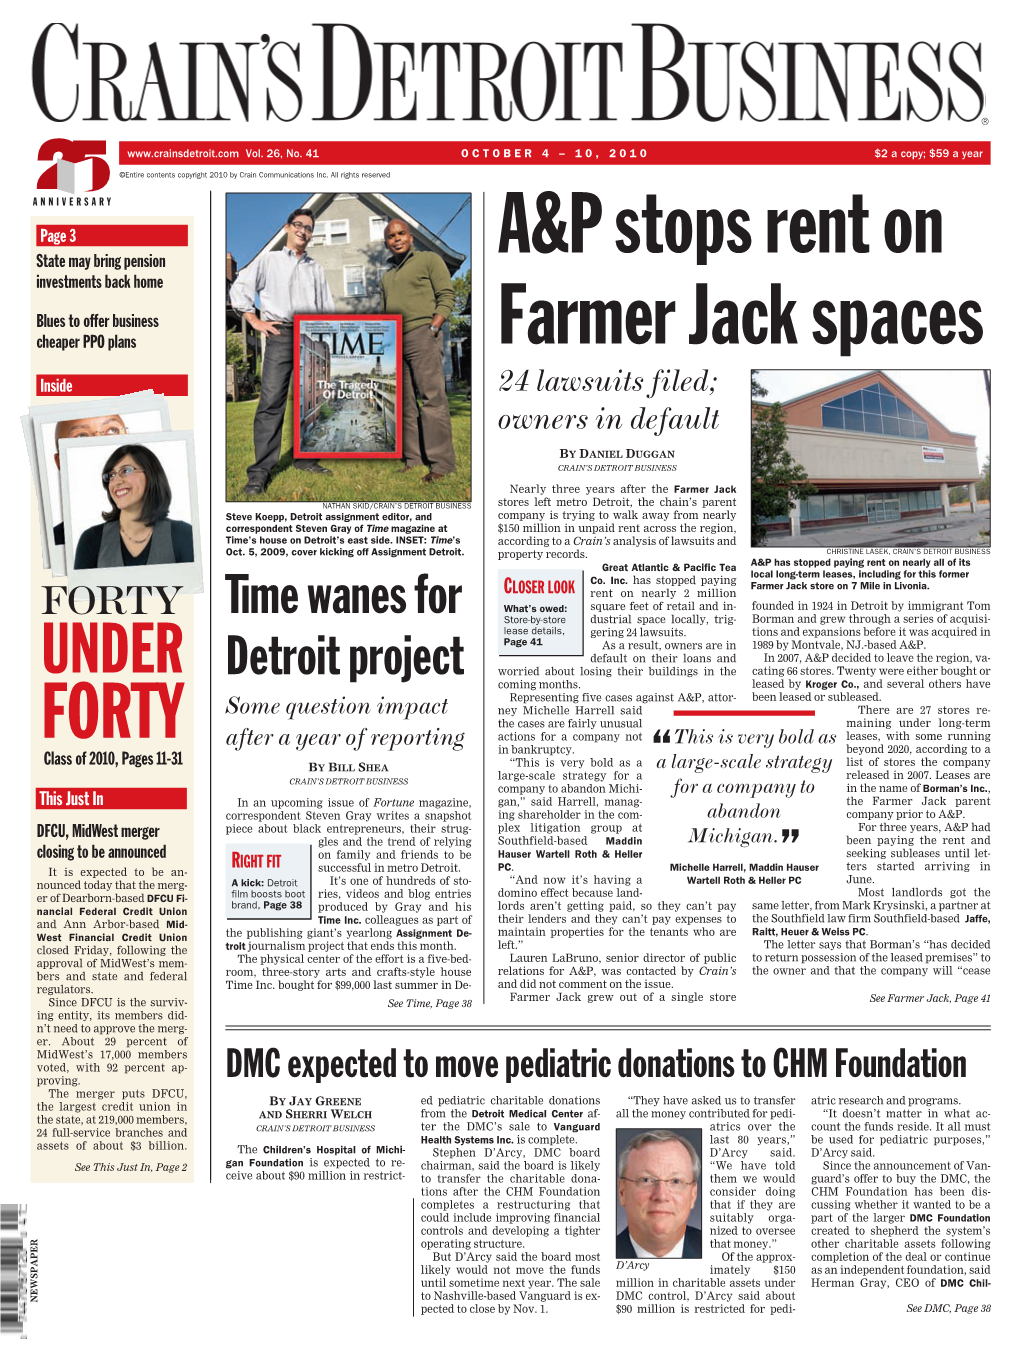 A&P Stops Rent on Farmer Jack Spaces